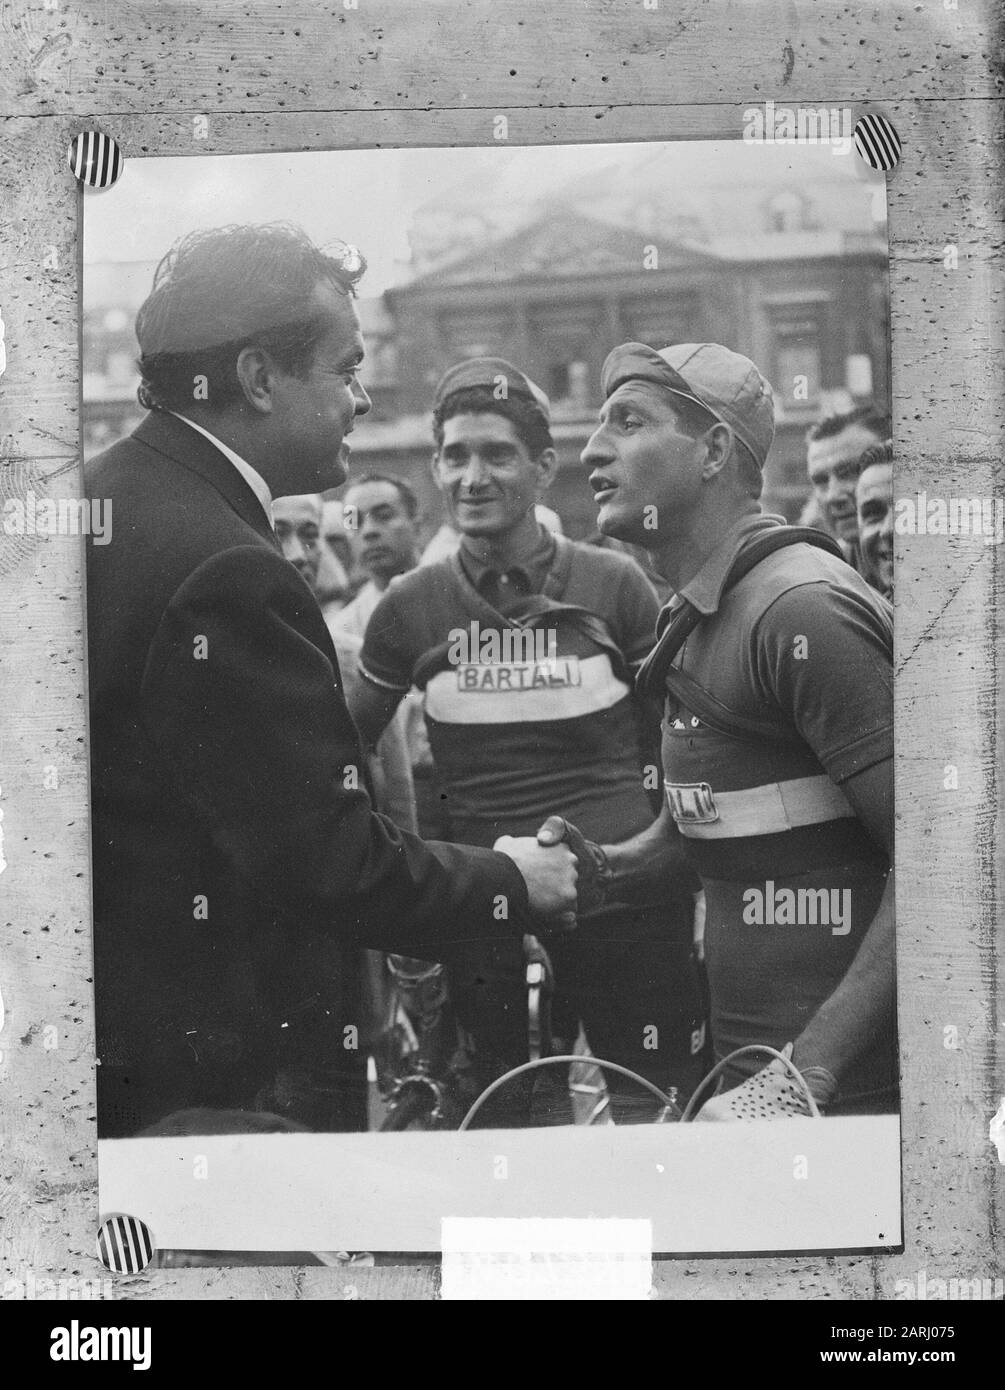 Tour de France 1950  Cyclist Bartali in conversation with film director and actor Orson Welles Annotation: Repronegative Date: 13 July 1950 Keywords: cycling, cycling Personal name: Bartali, Gino, Welles, Orson Stock Photo